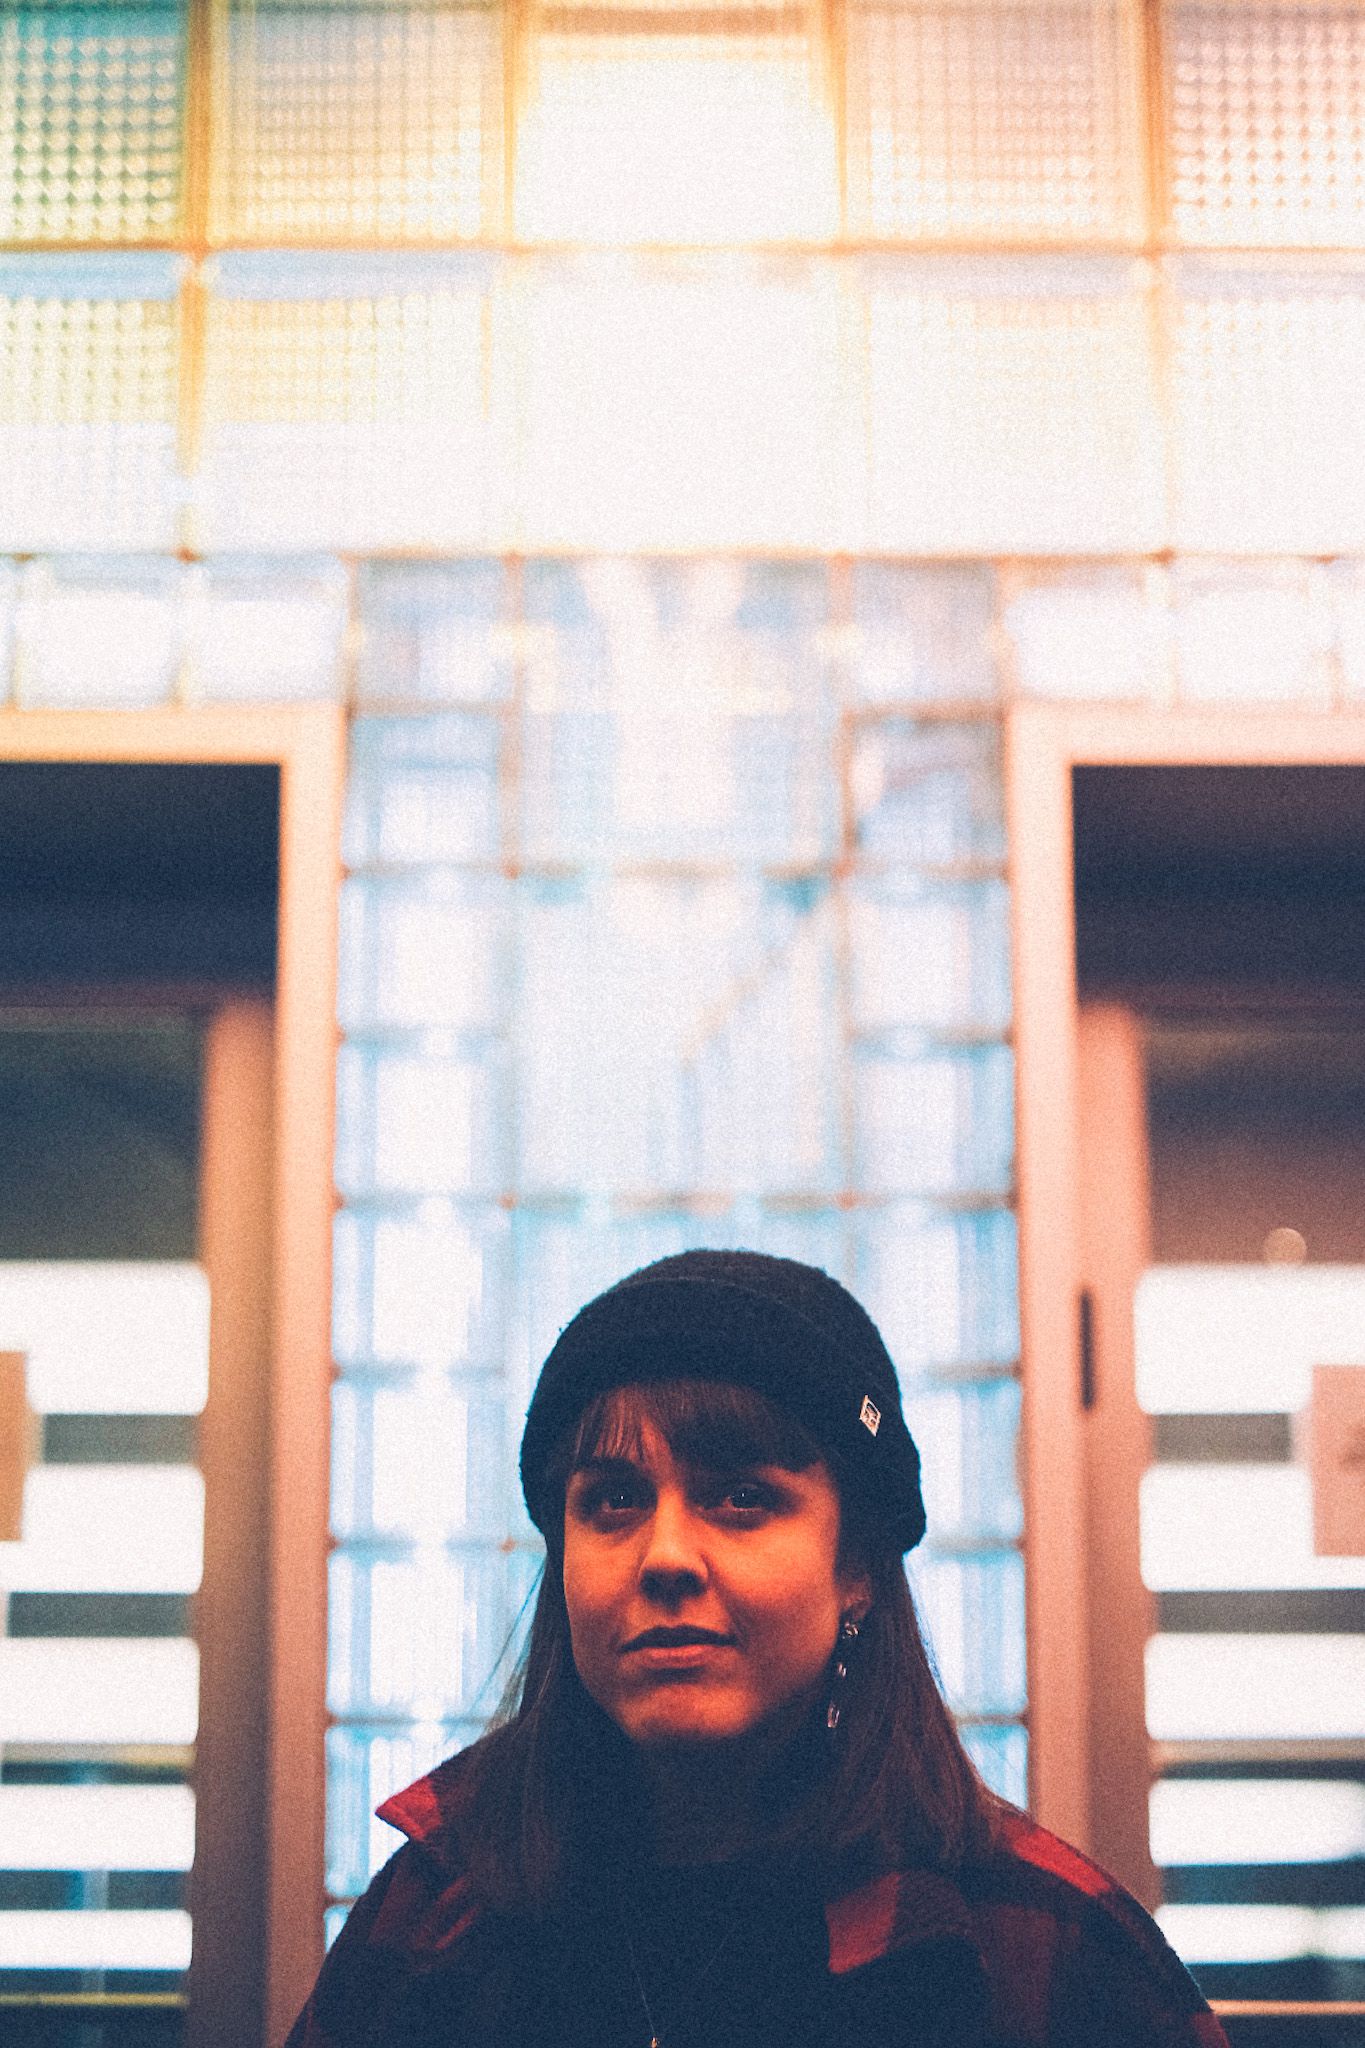 A woman in a black beanie looks up, under the lights of a theatre awning. In the background are squares of frosted white-blue glass between two doors.